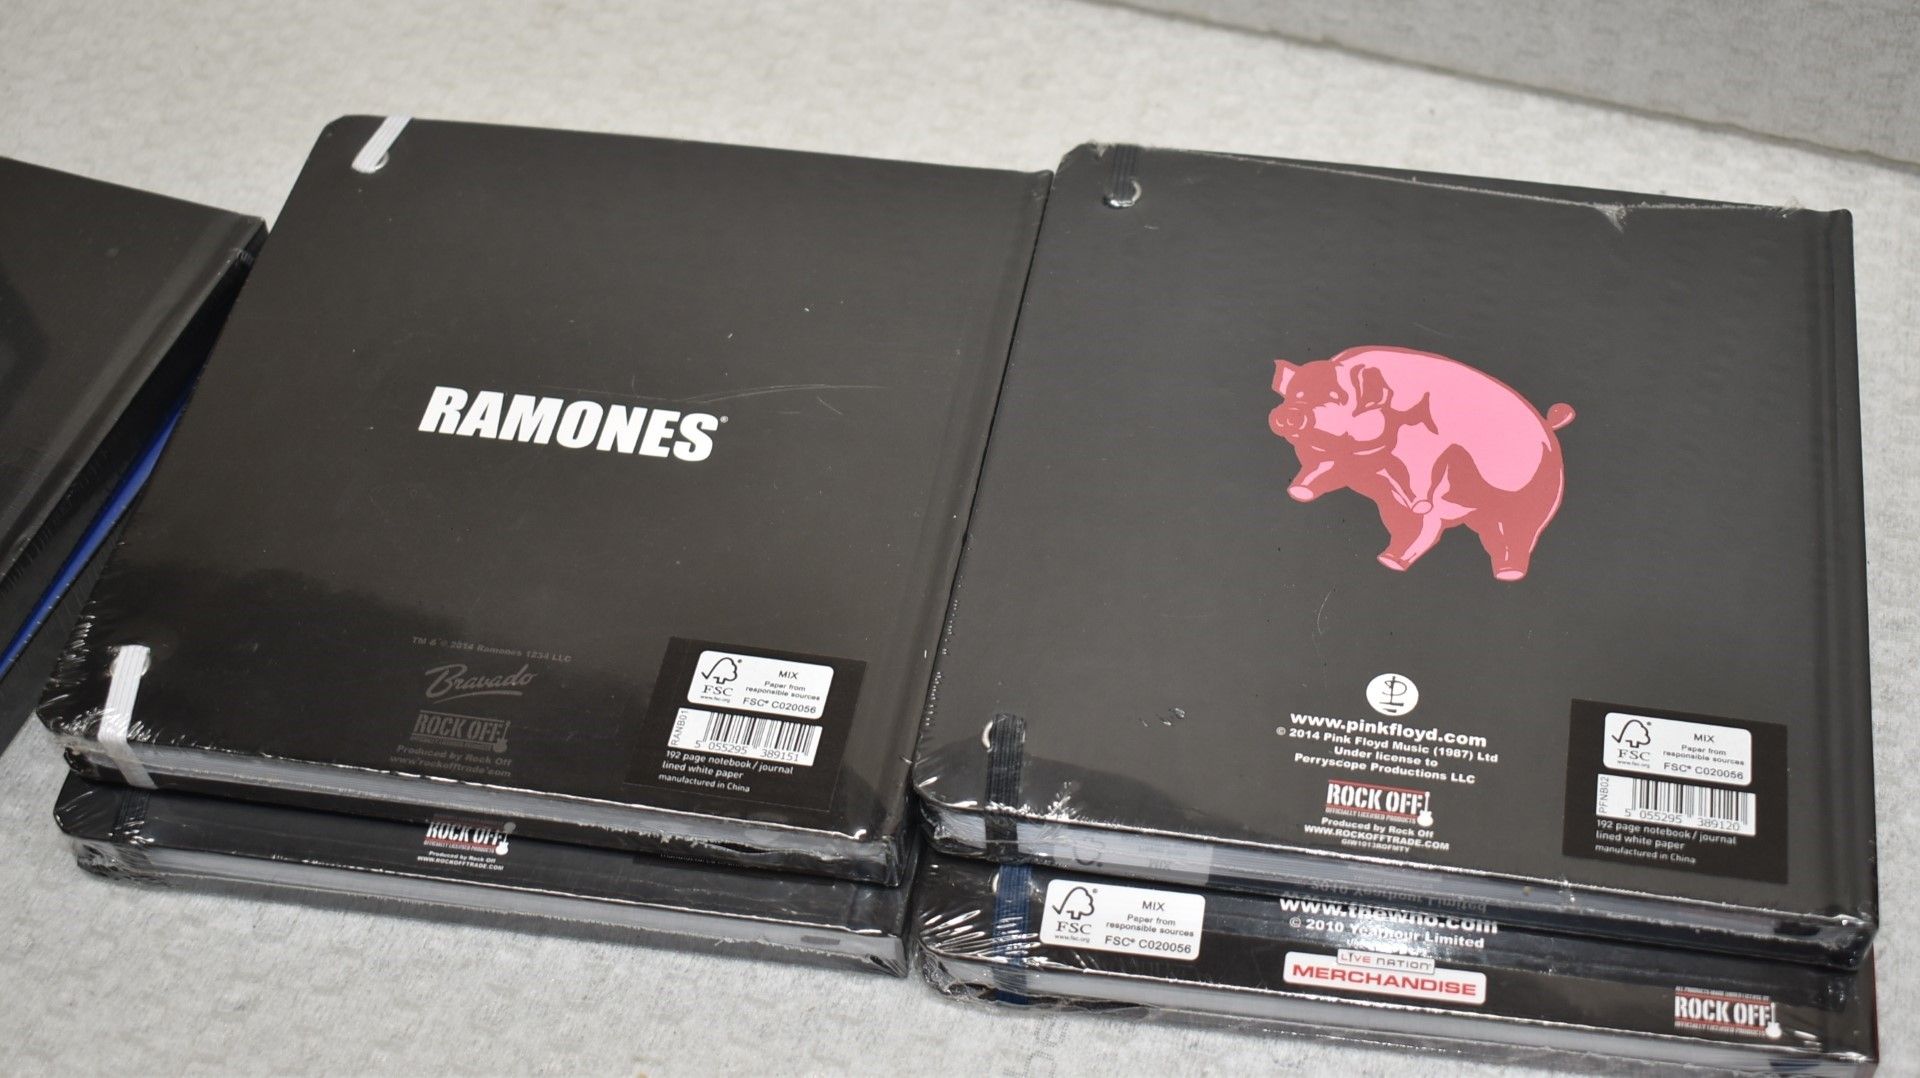 12 x Rock Band Themed 192 Page Notebook Journals - Bands Include Sex Pistols, Guns n Roses, Pink - Image 3 of 9